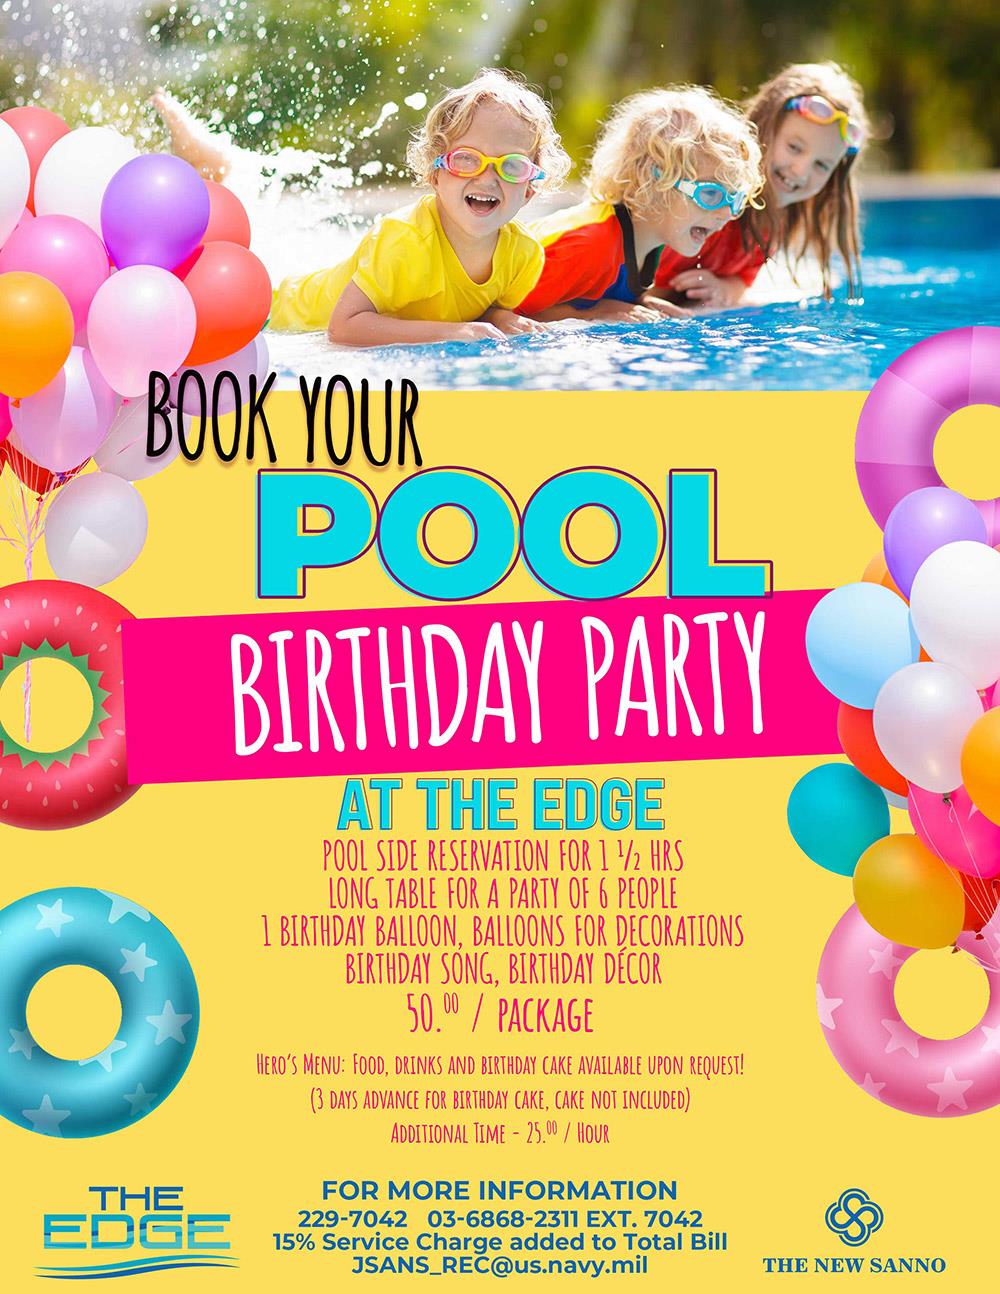 Pool Birthday Party at The Edge